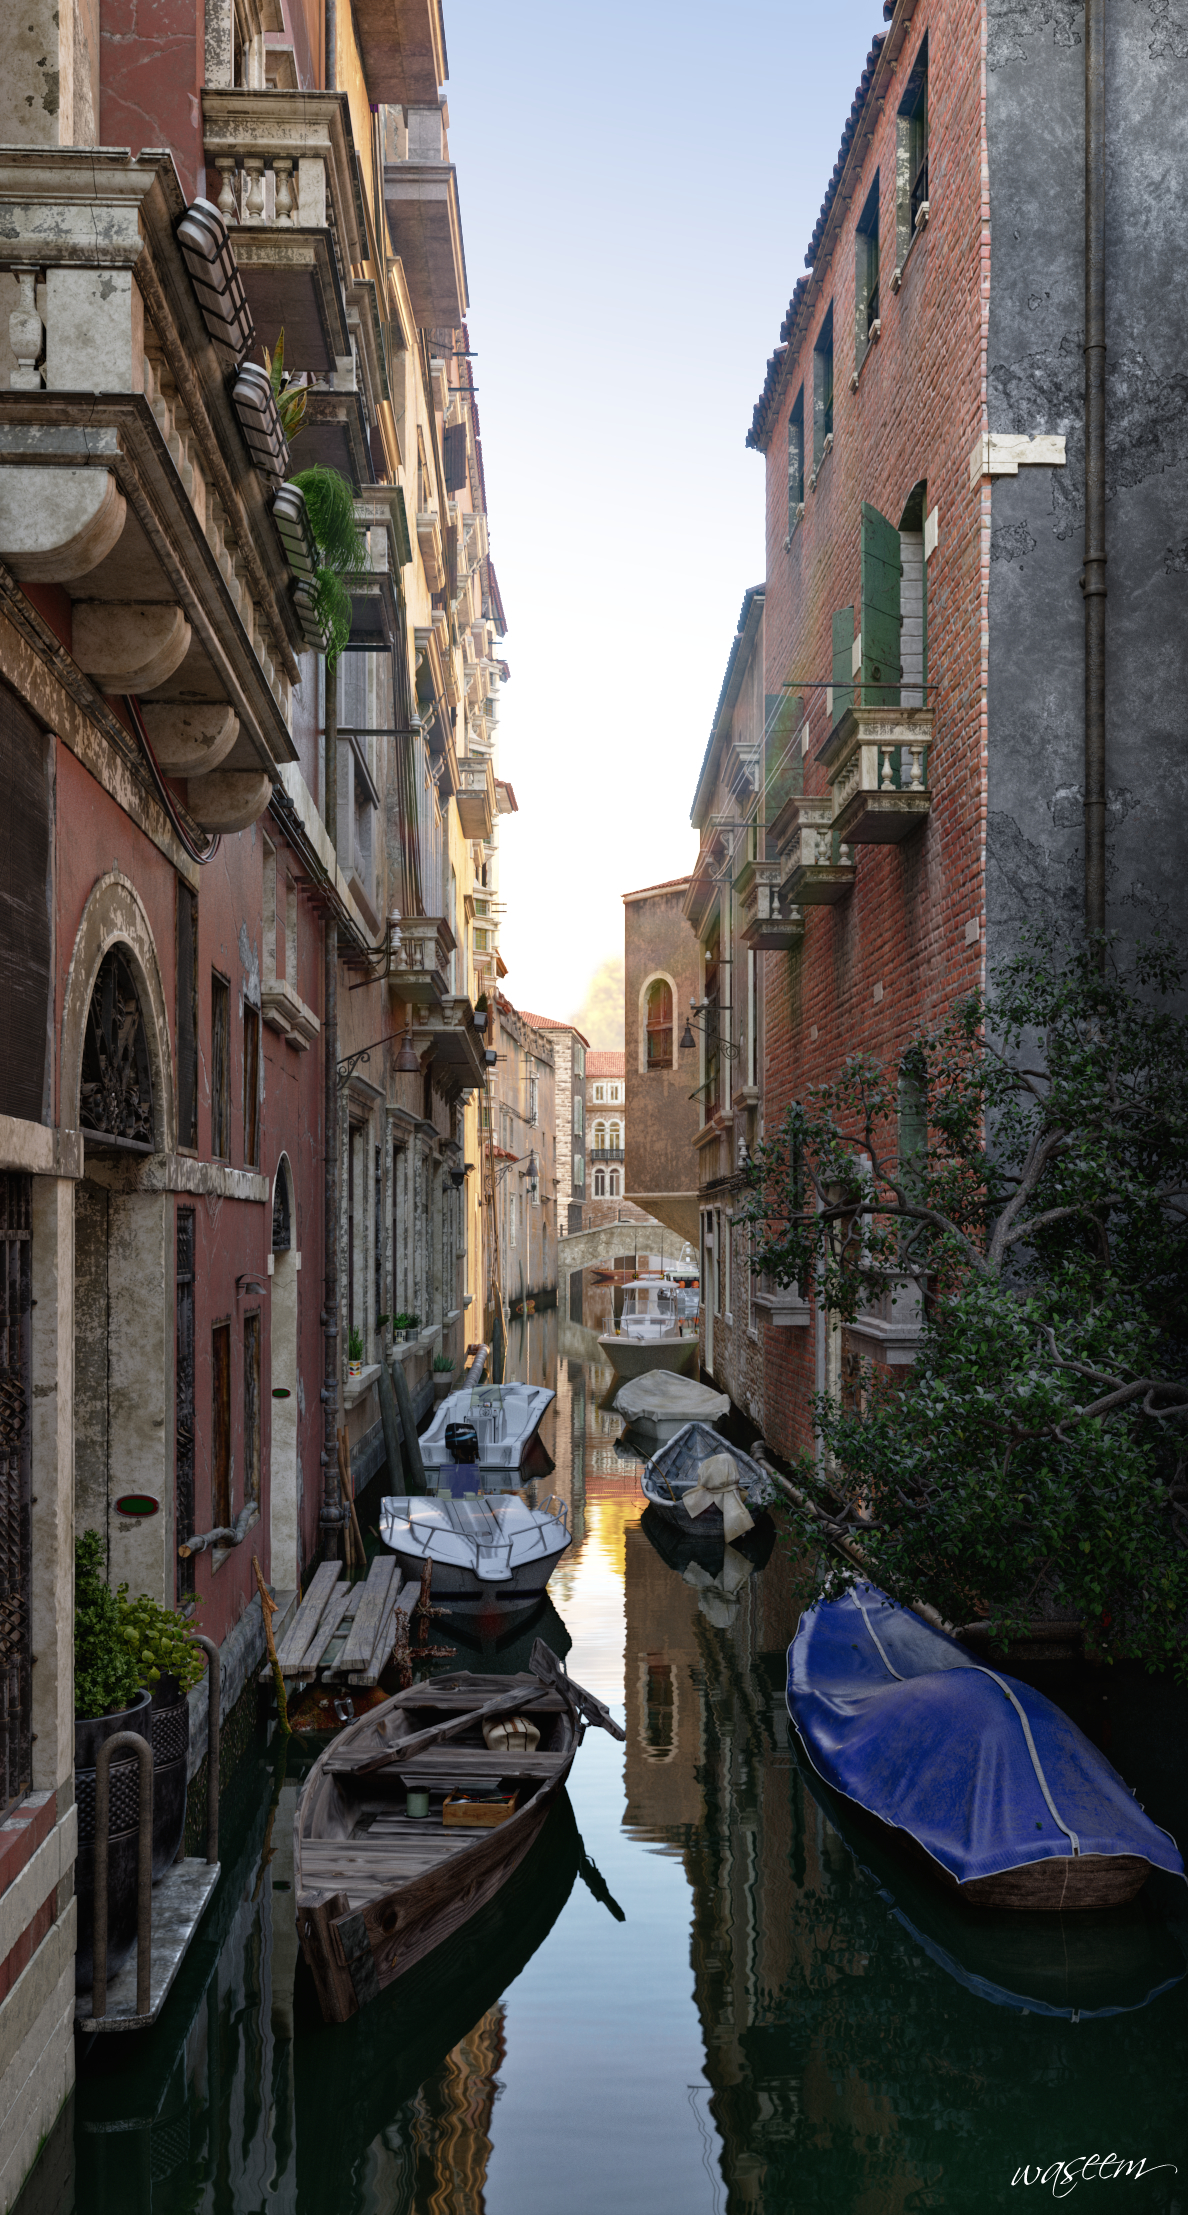 d photoshop ds max substance designer vray substance painter venice waseemd